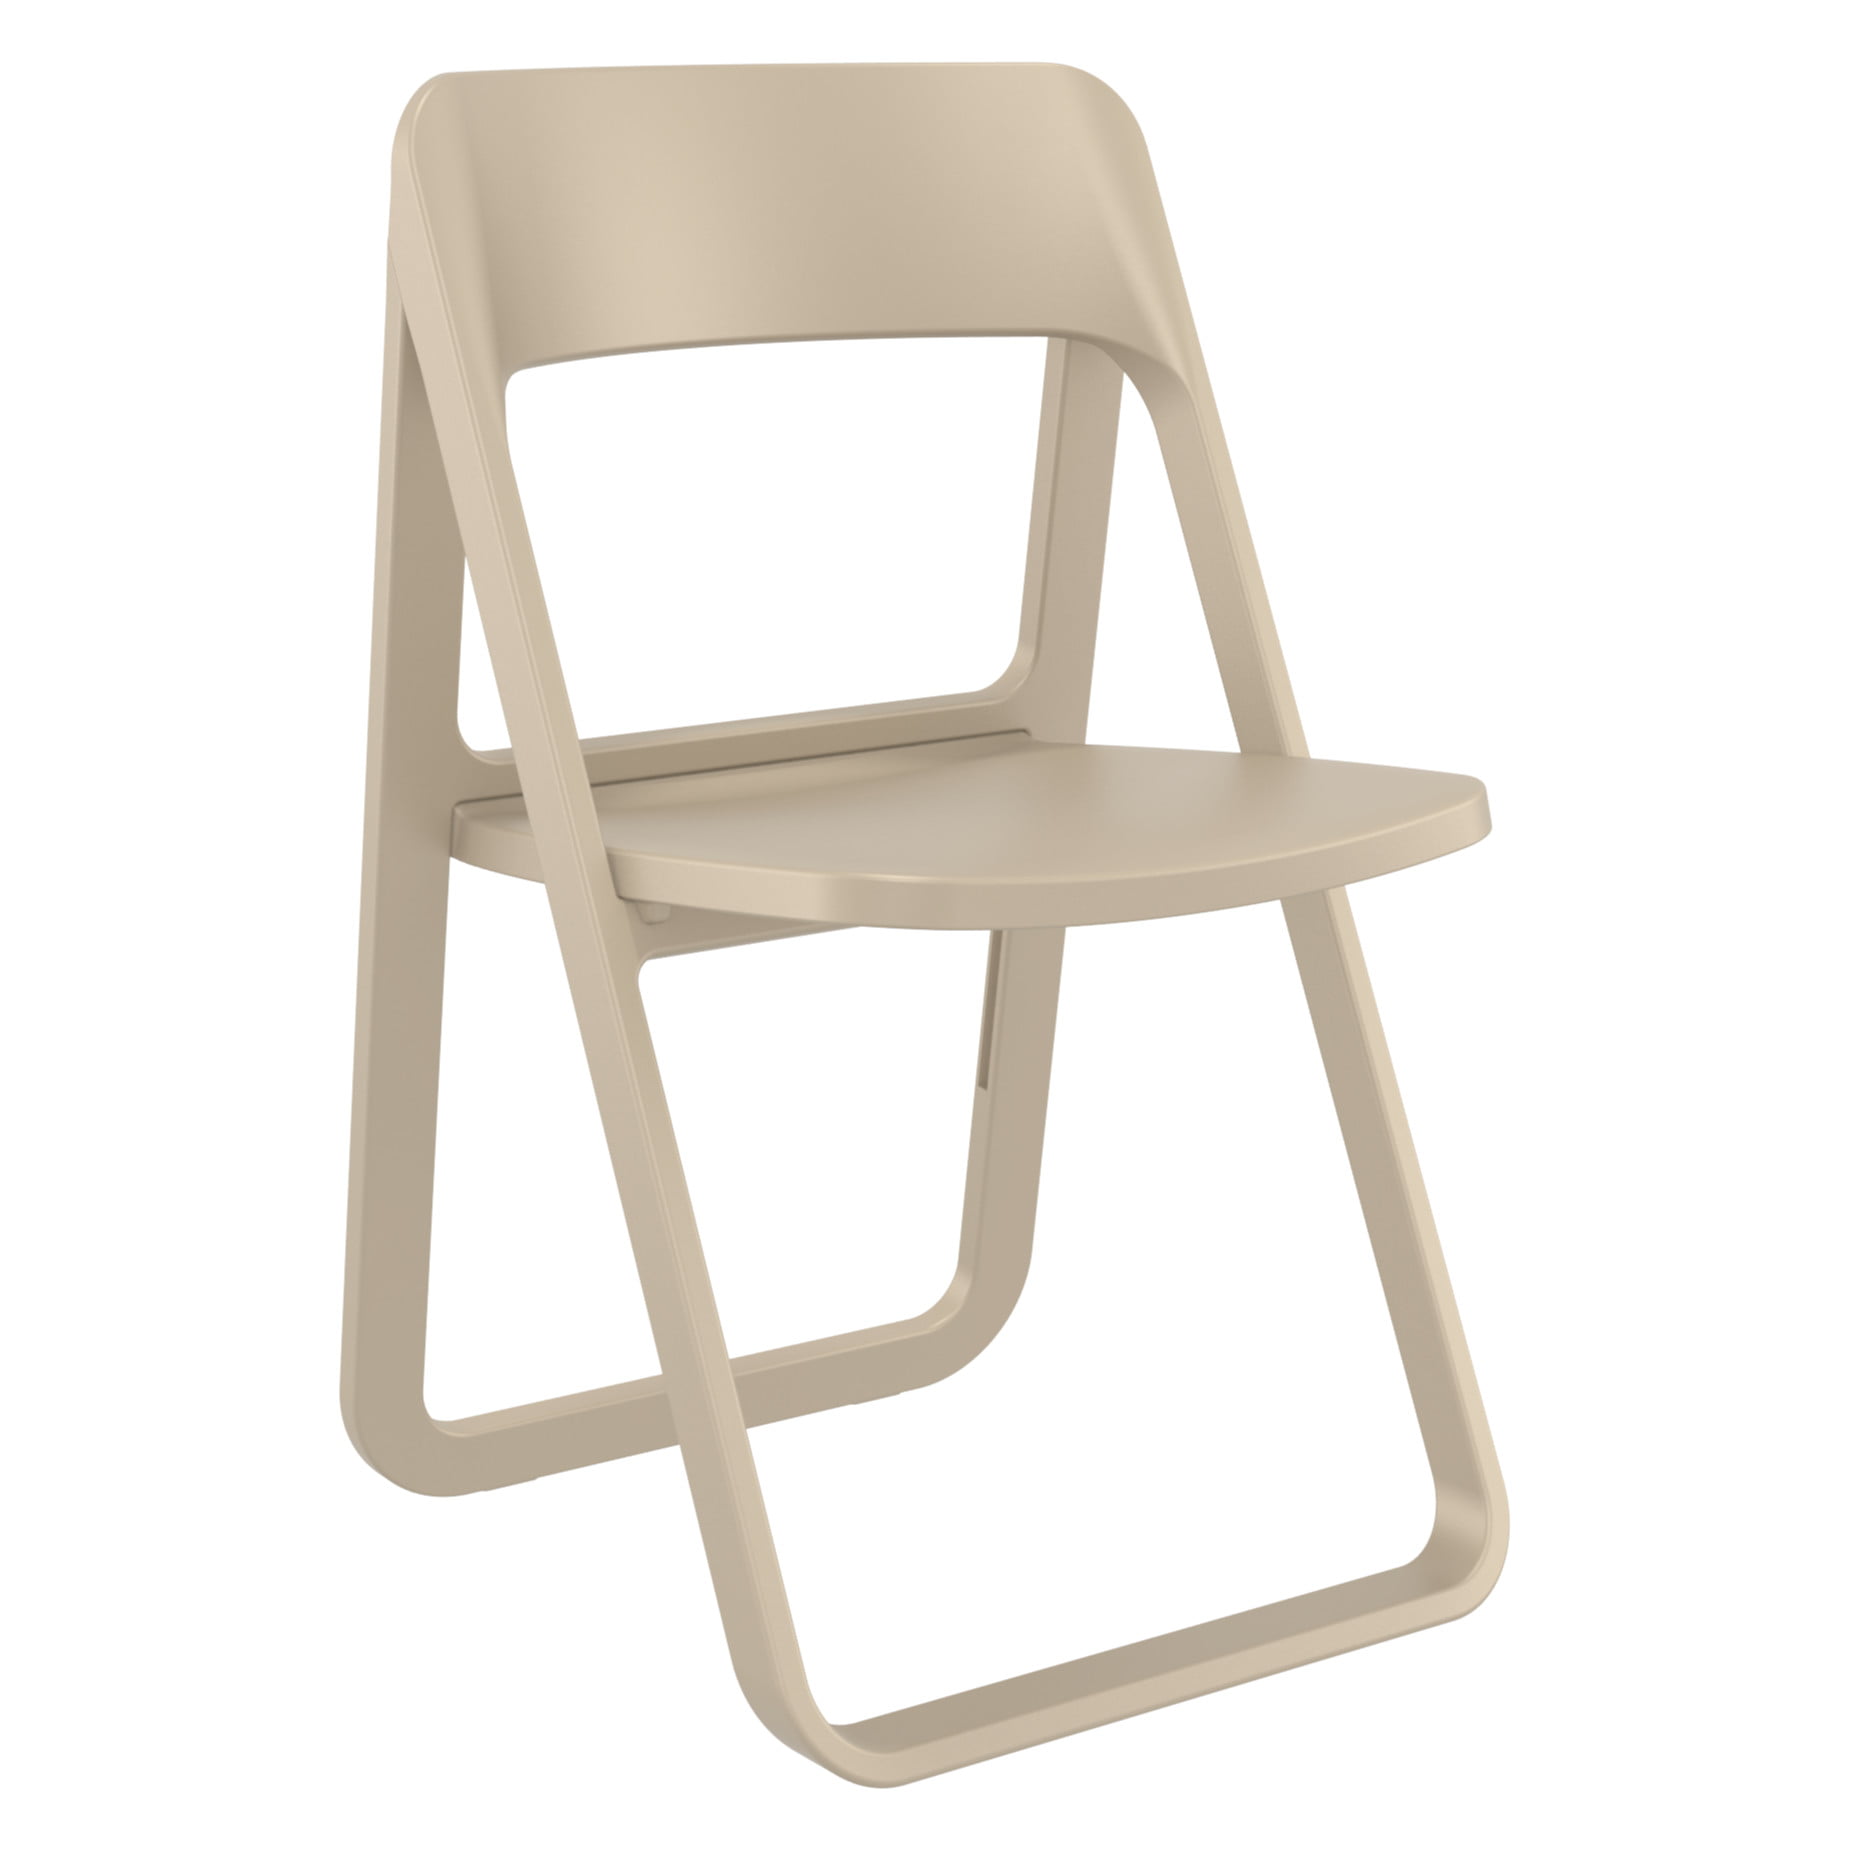 Isp079-dvr Dream Folding Outdoor Chair, Taupe